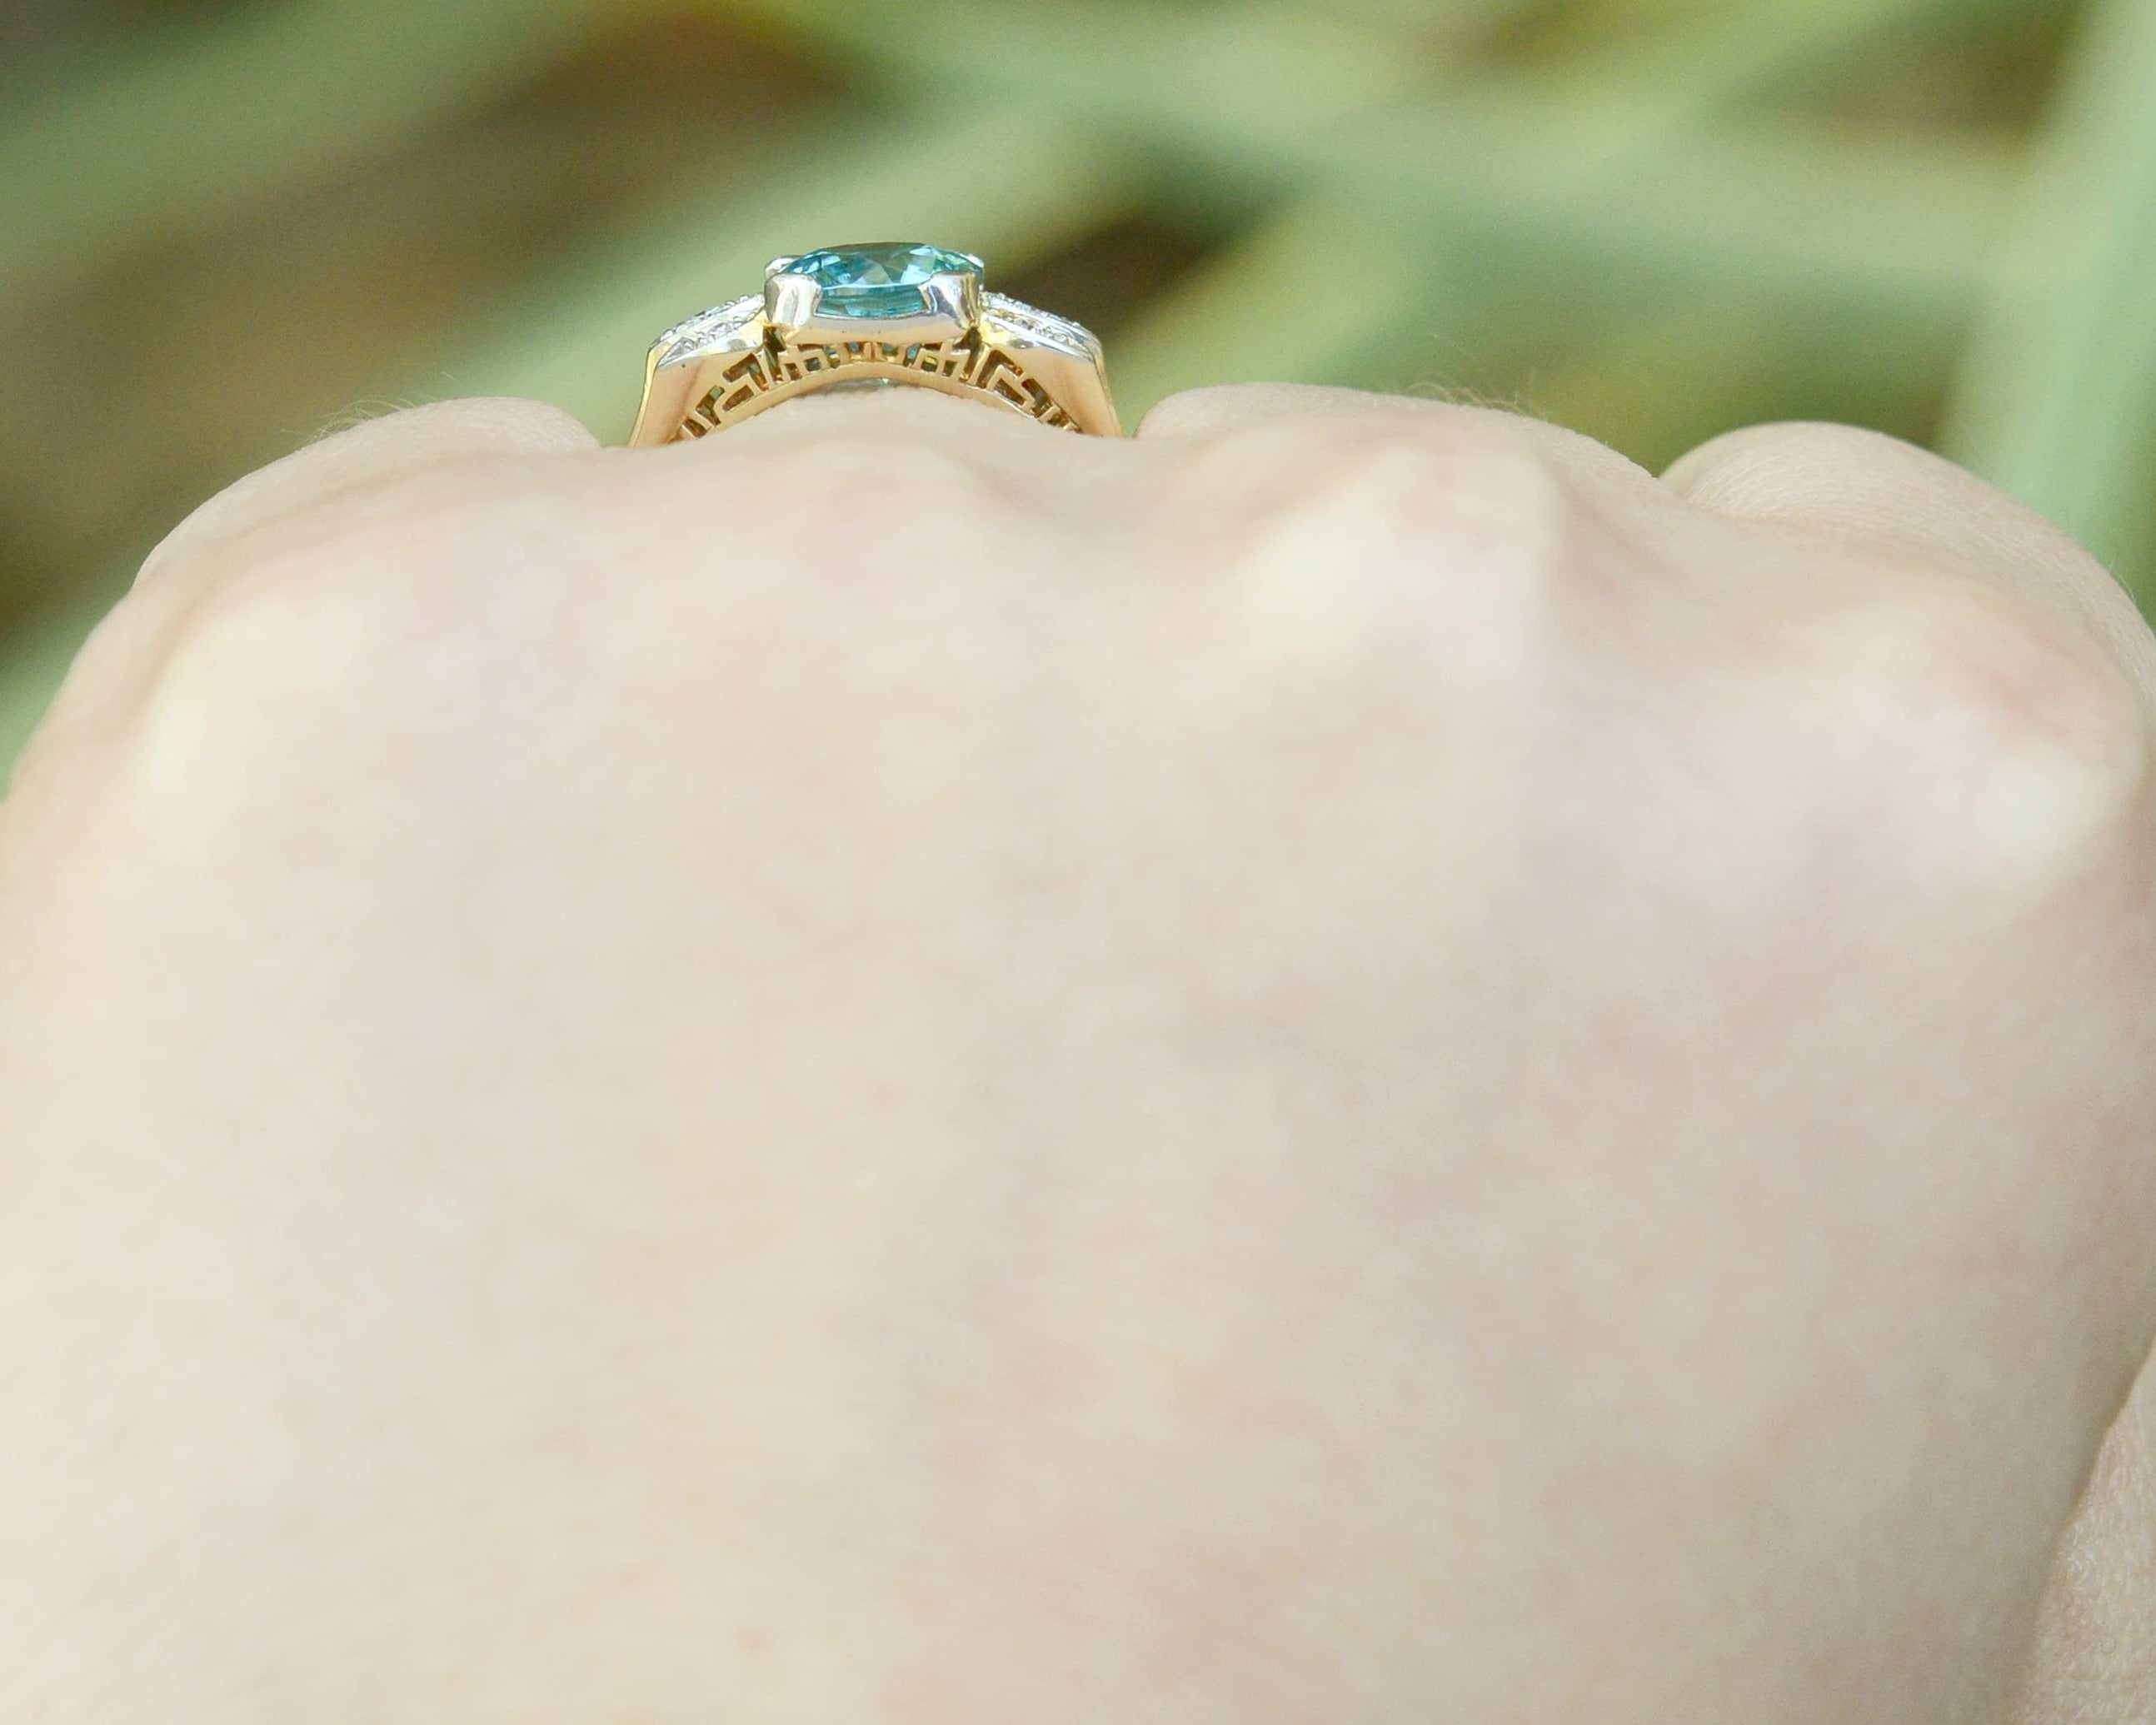 A neon blue zircon with great clarity set in a bridal ring with diamonds.